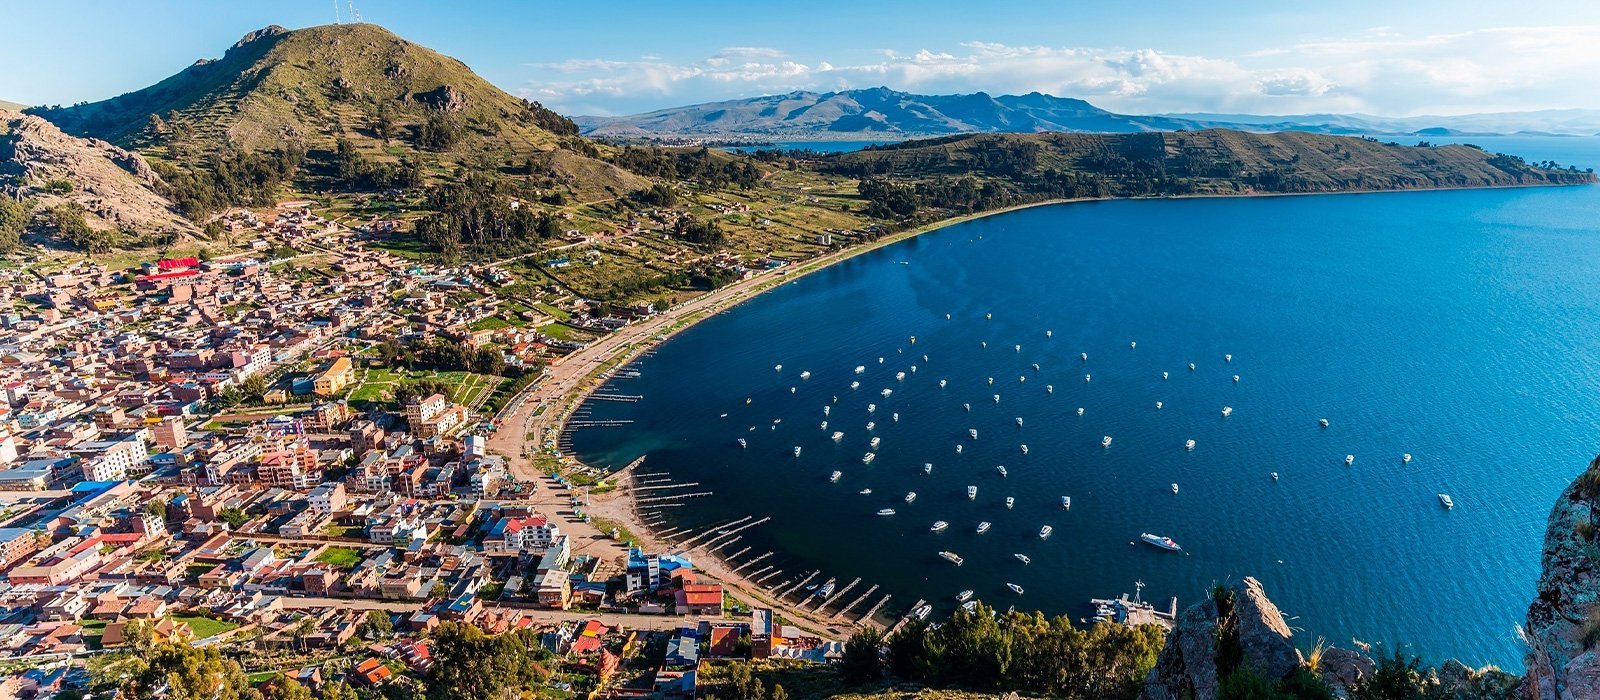 Isla del Sol and the Communities of Lake Titicaca